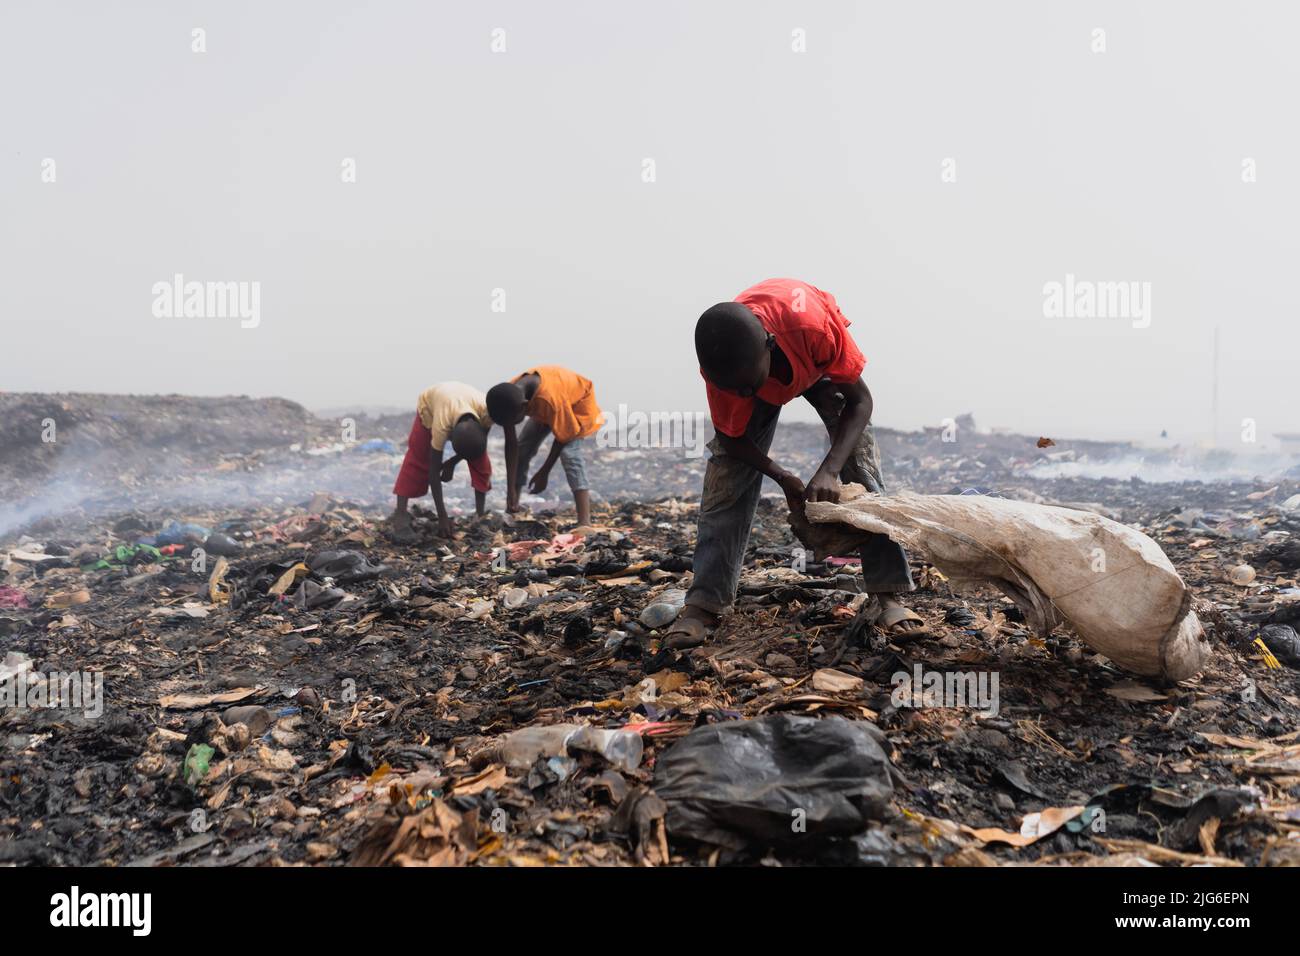 Three small African children searching for recyclable valuables at the garbage dump amidst piles of waste, dirt and smoldering smoke Stock Photo